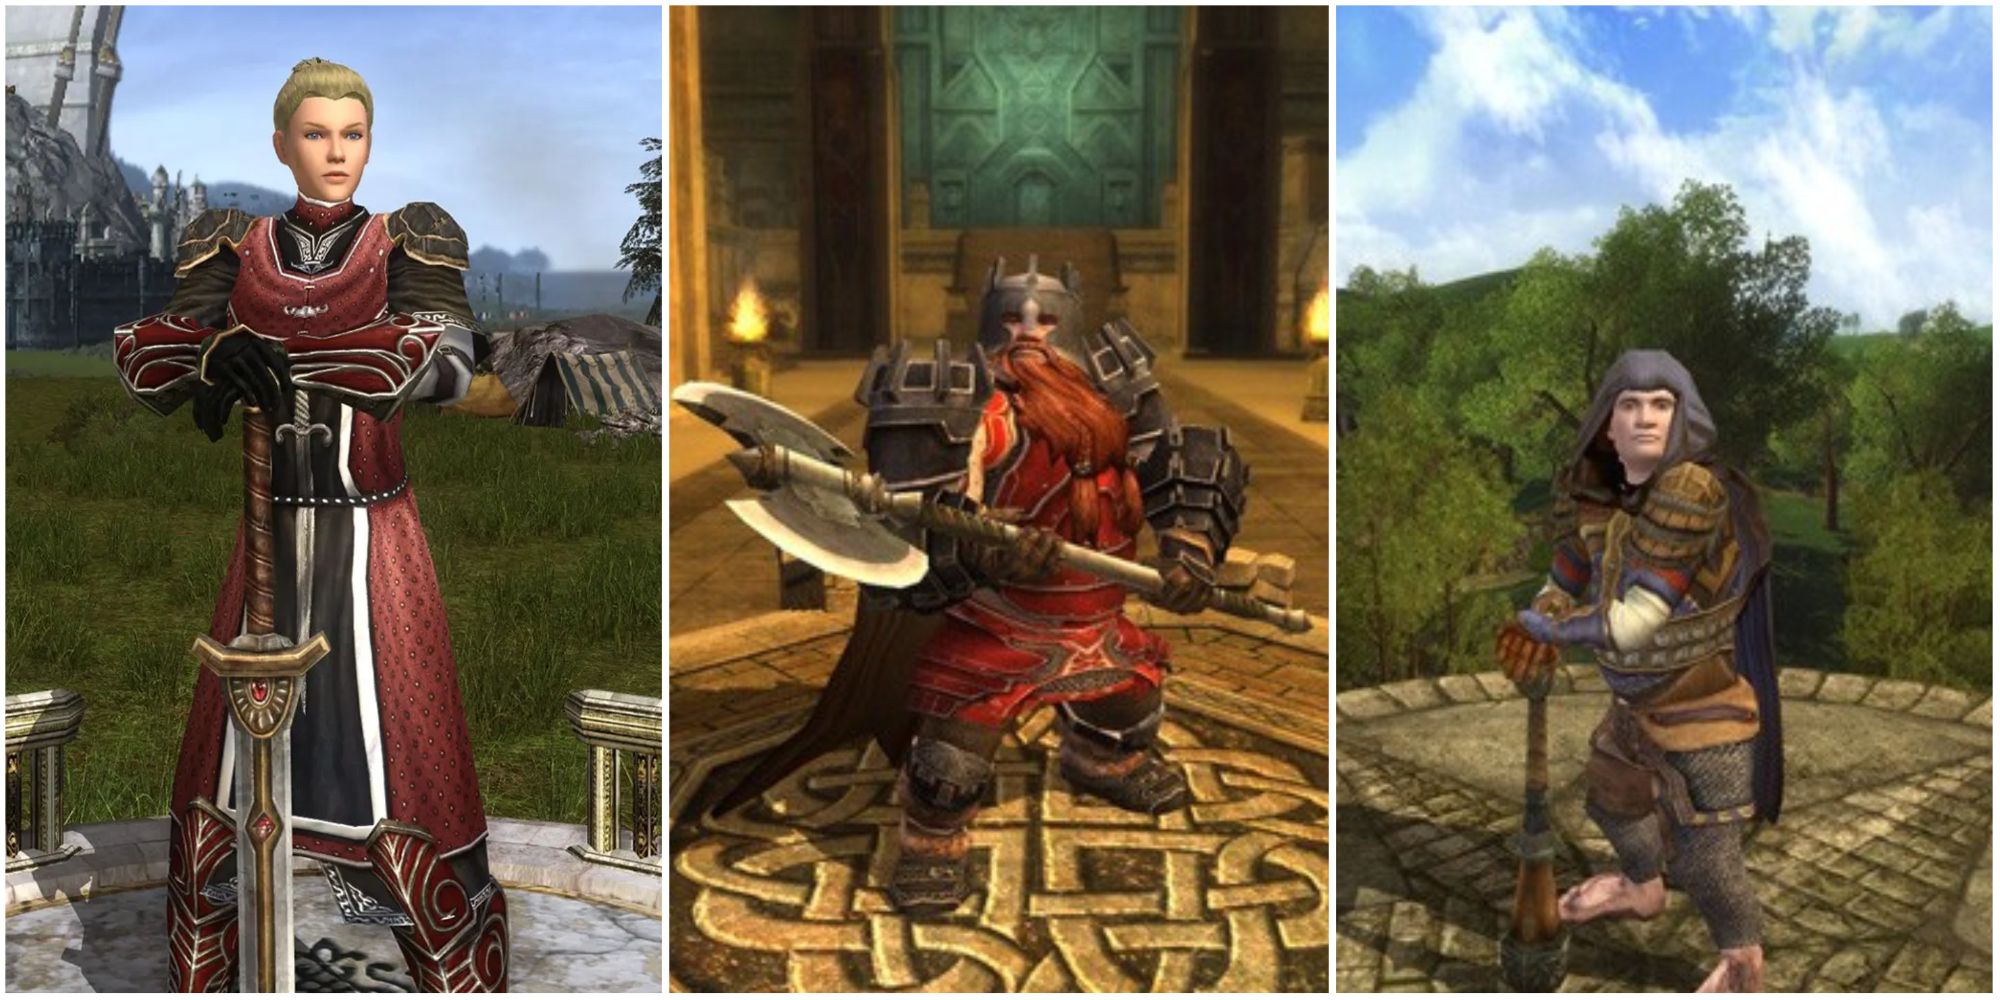 Human, Dwarf, and Hobbit in The Lord of the Rings Online